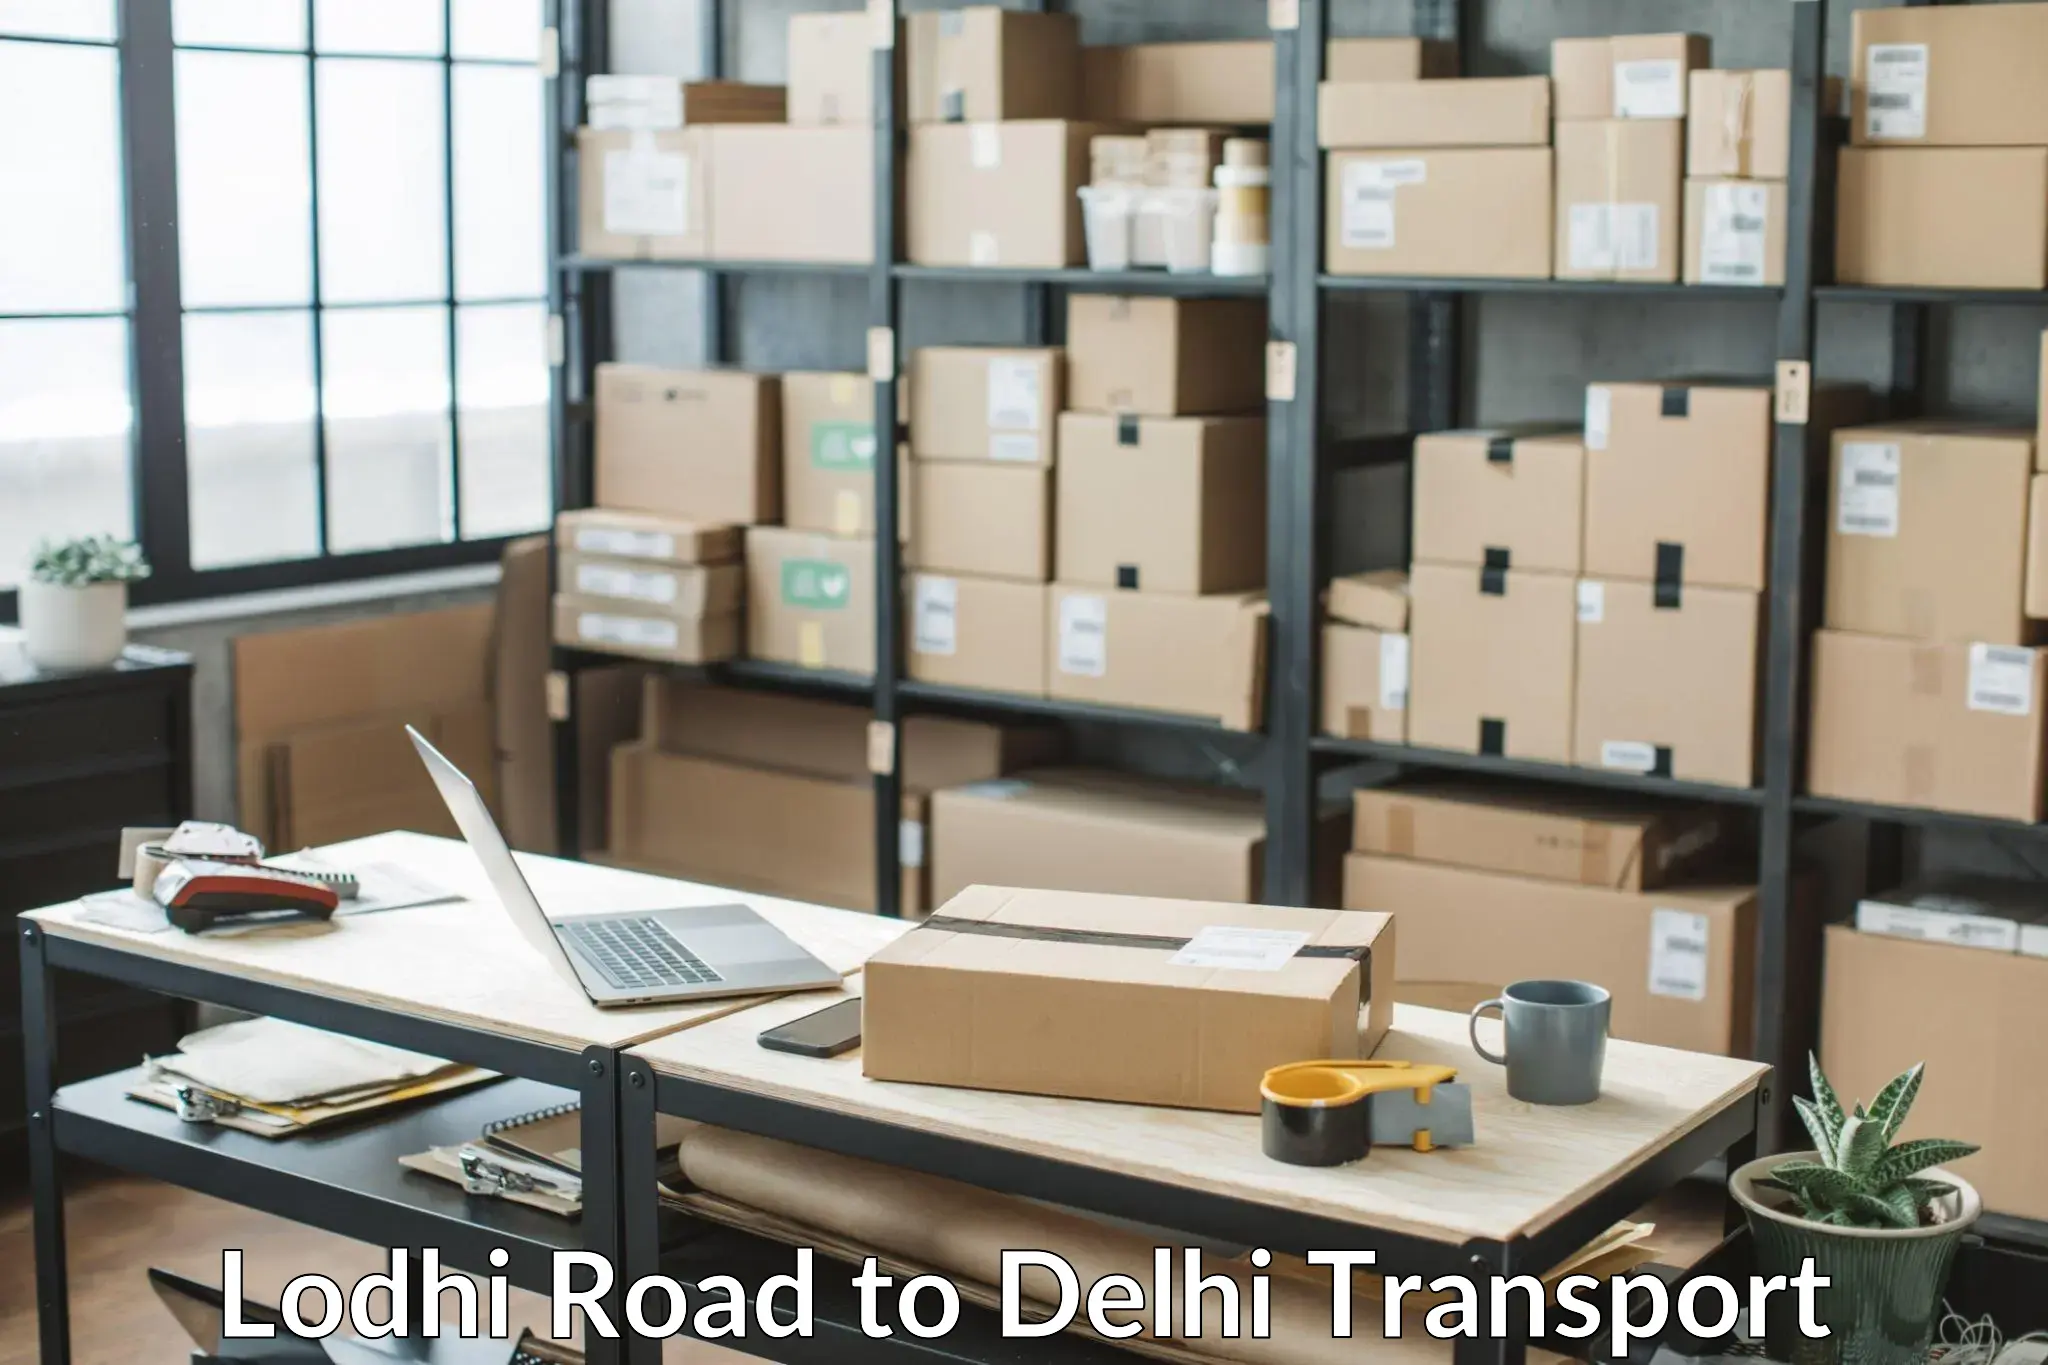 Container transport service Lodhi Road to Delhi Technological University DTU